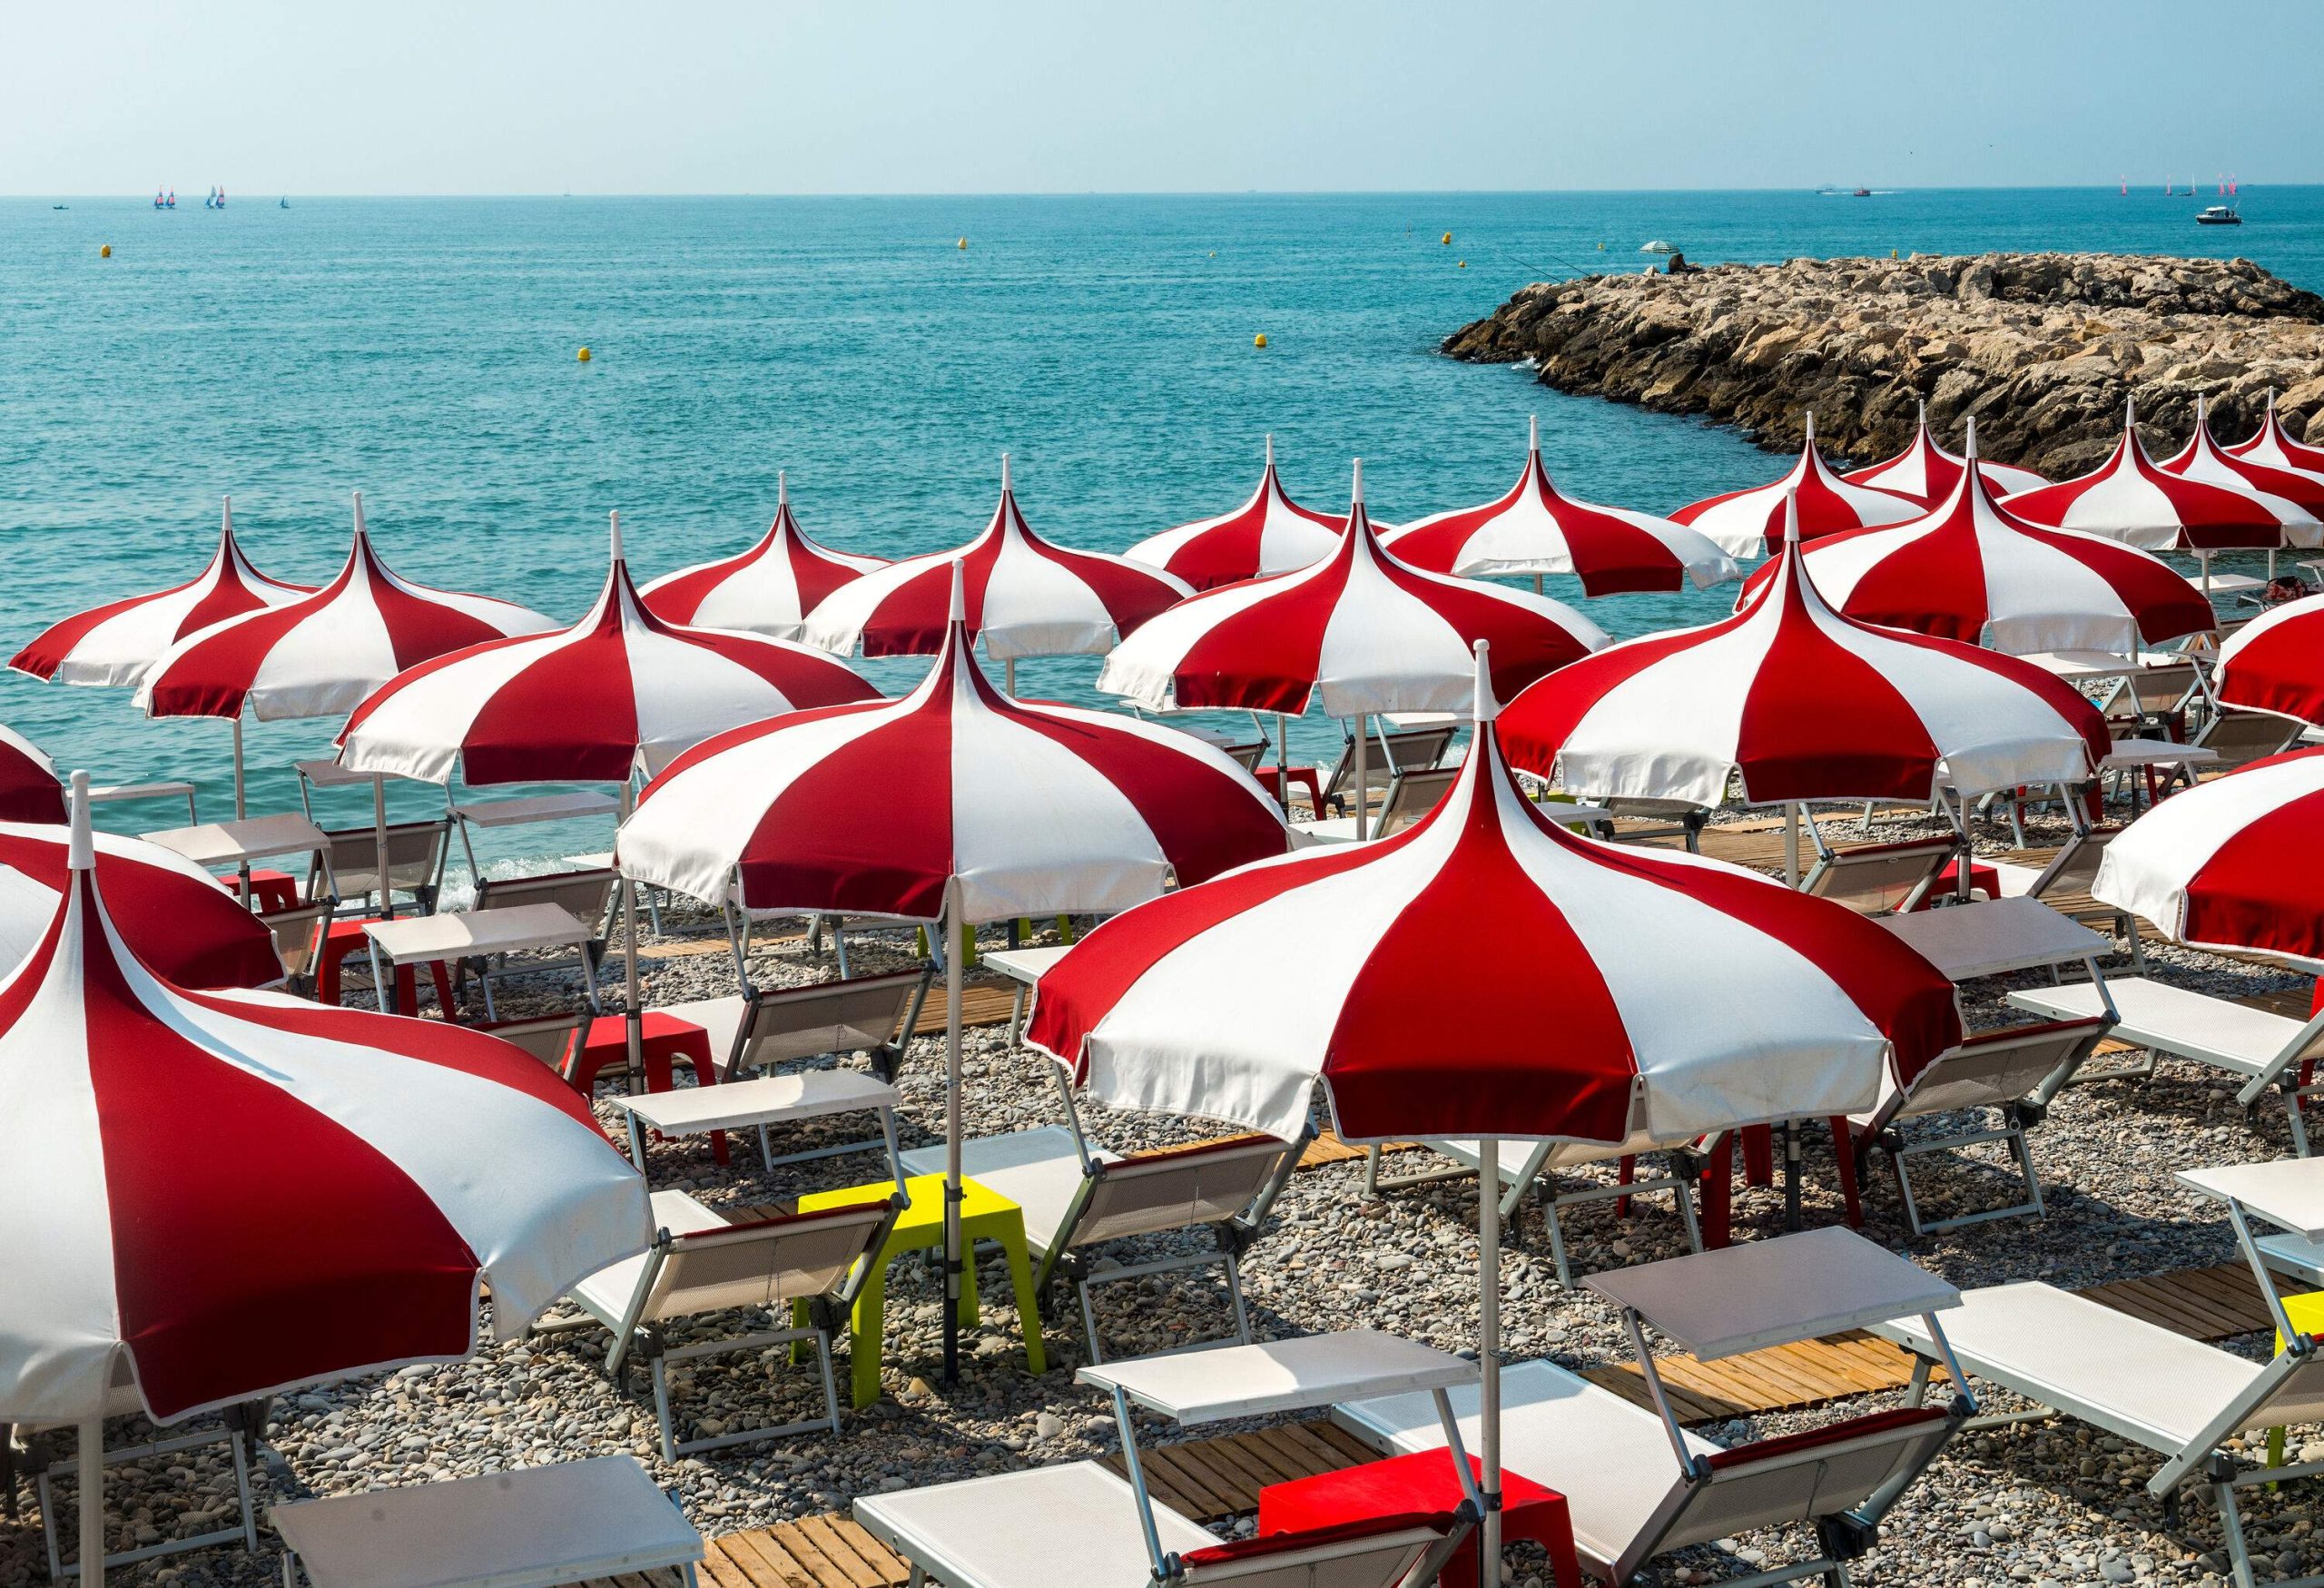 Sun loungers with red and white parasols lined up along a stony beach with a panoramic view of the ocean.